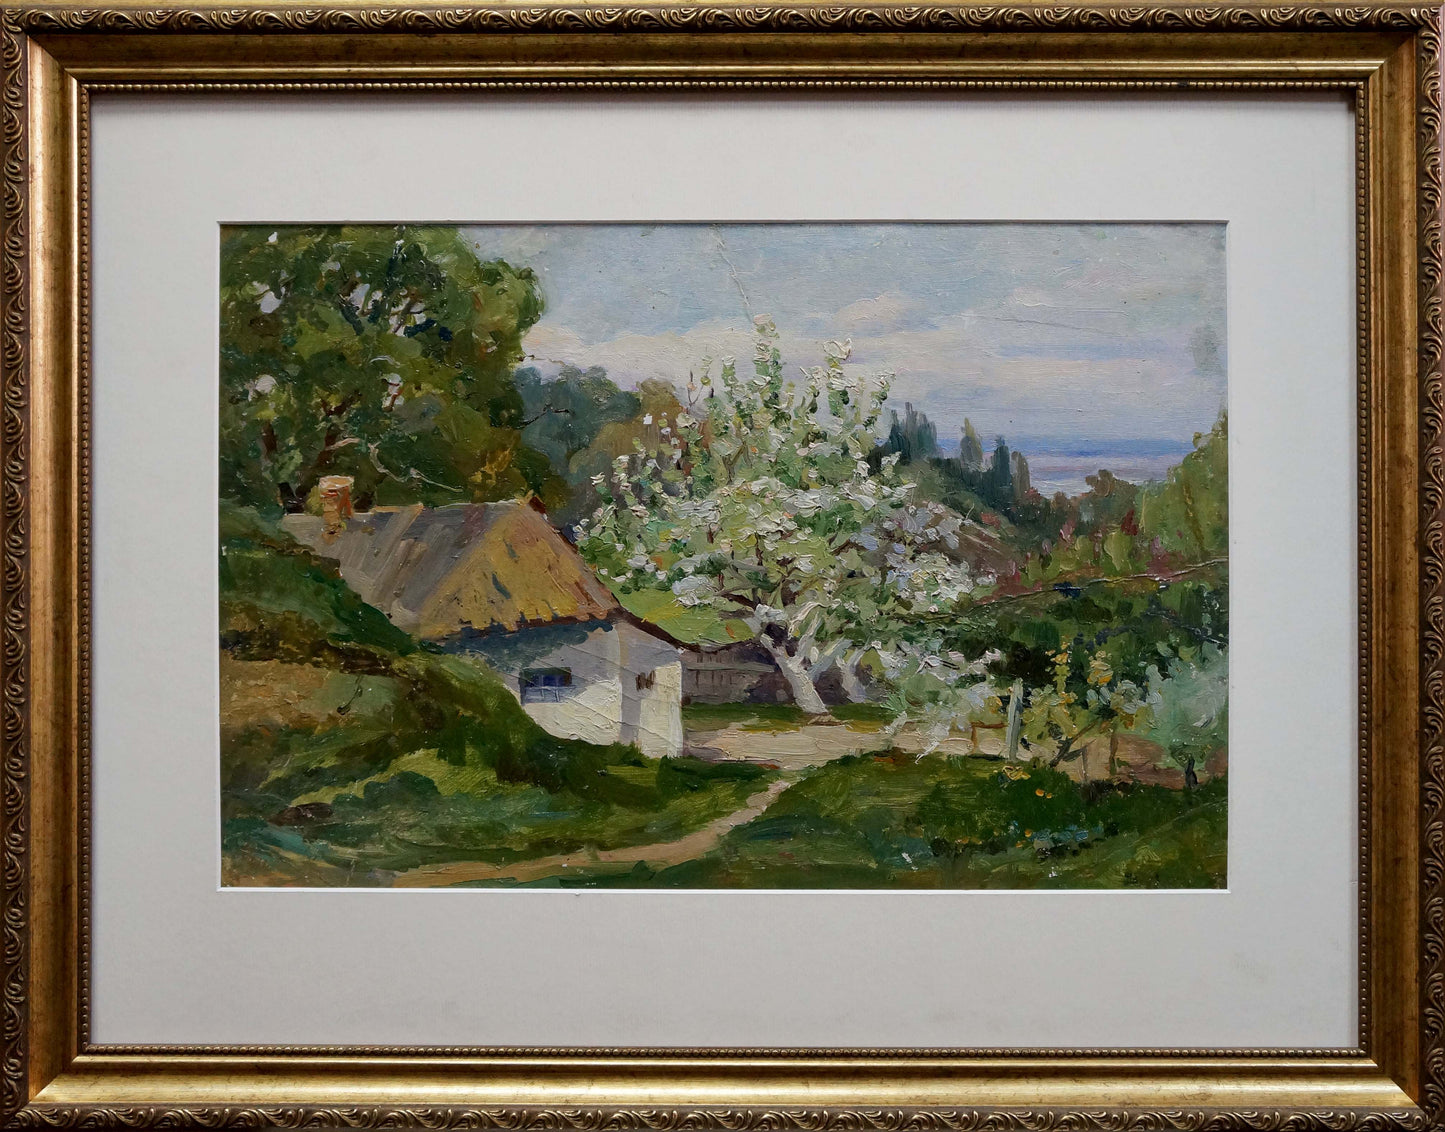 Oil painting In the village